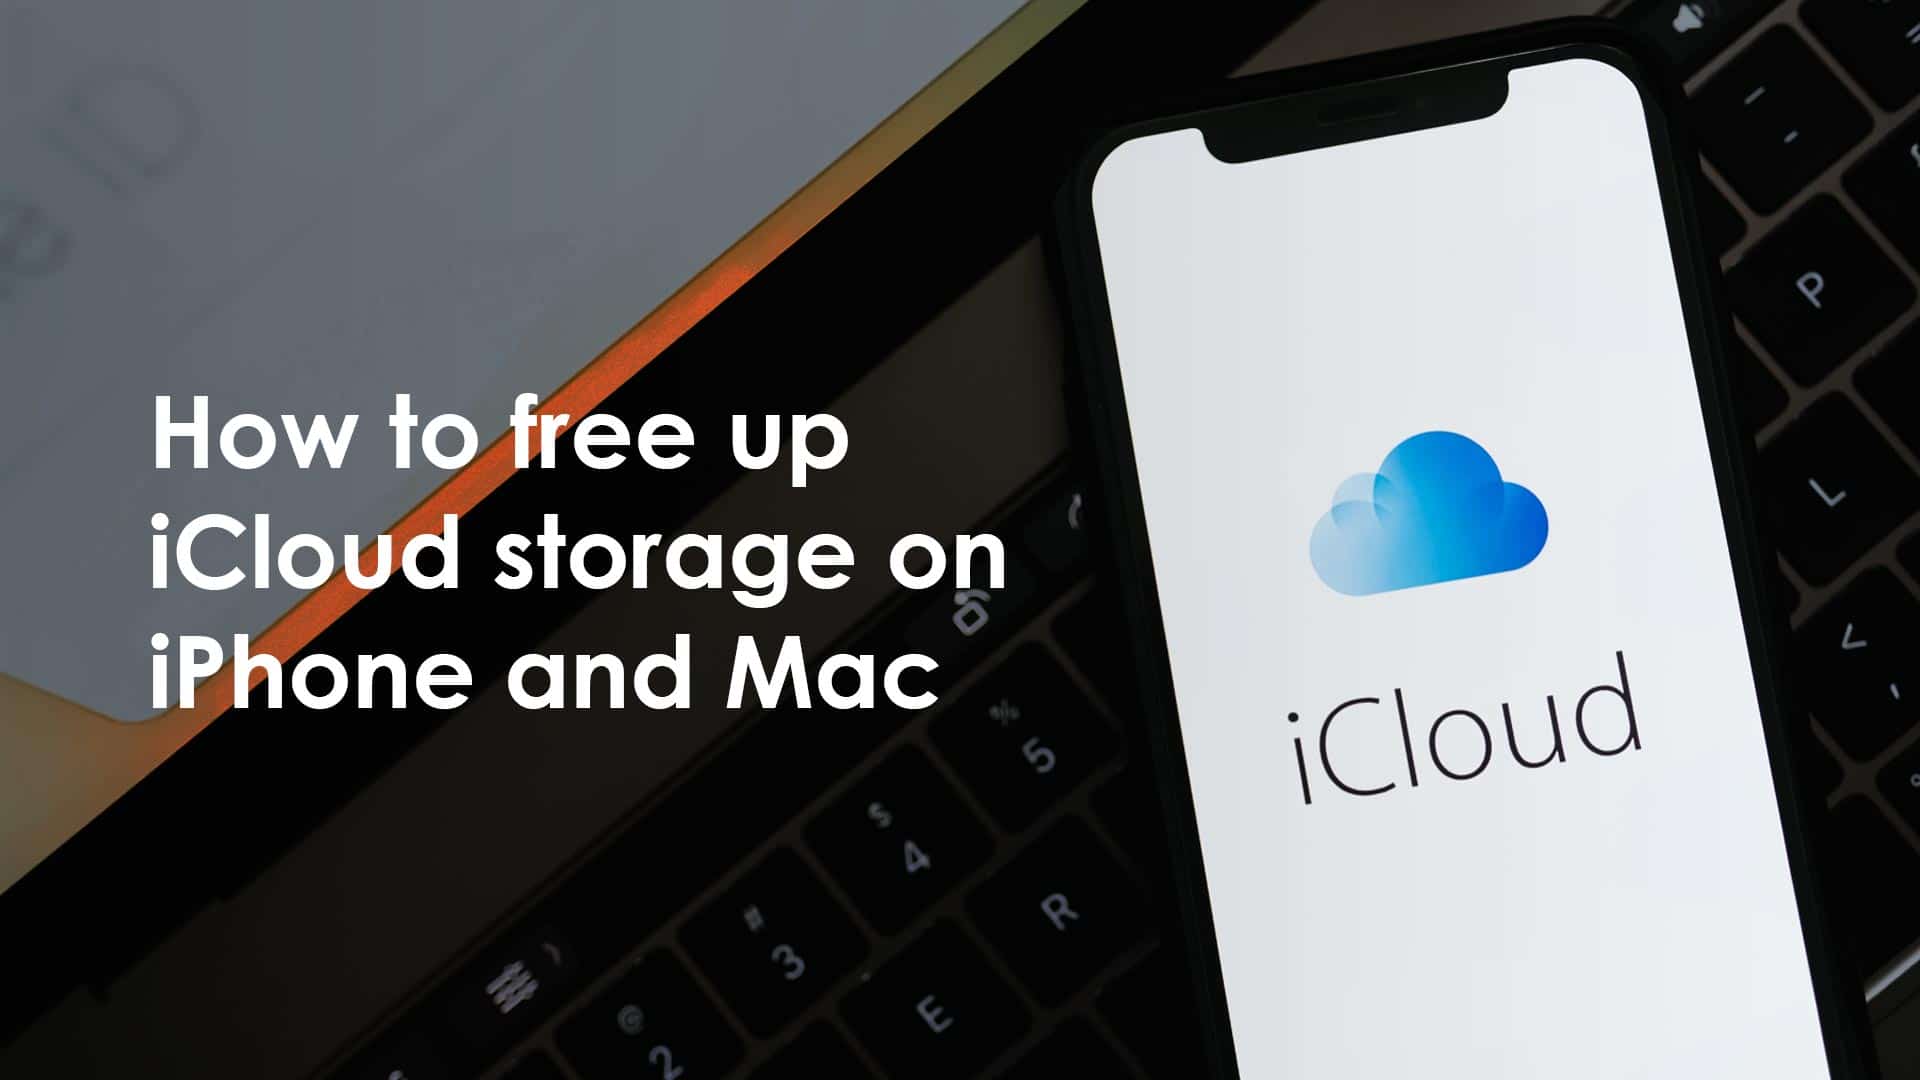 How to free up iCloud storage on iPhone and Mac